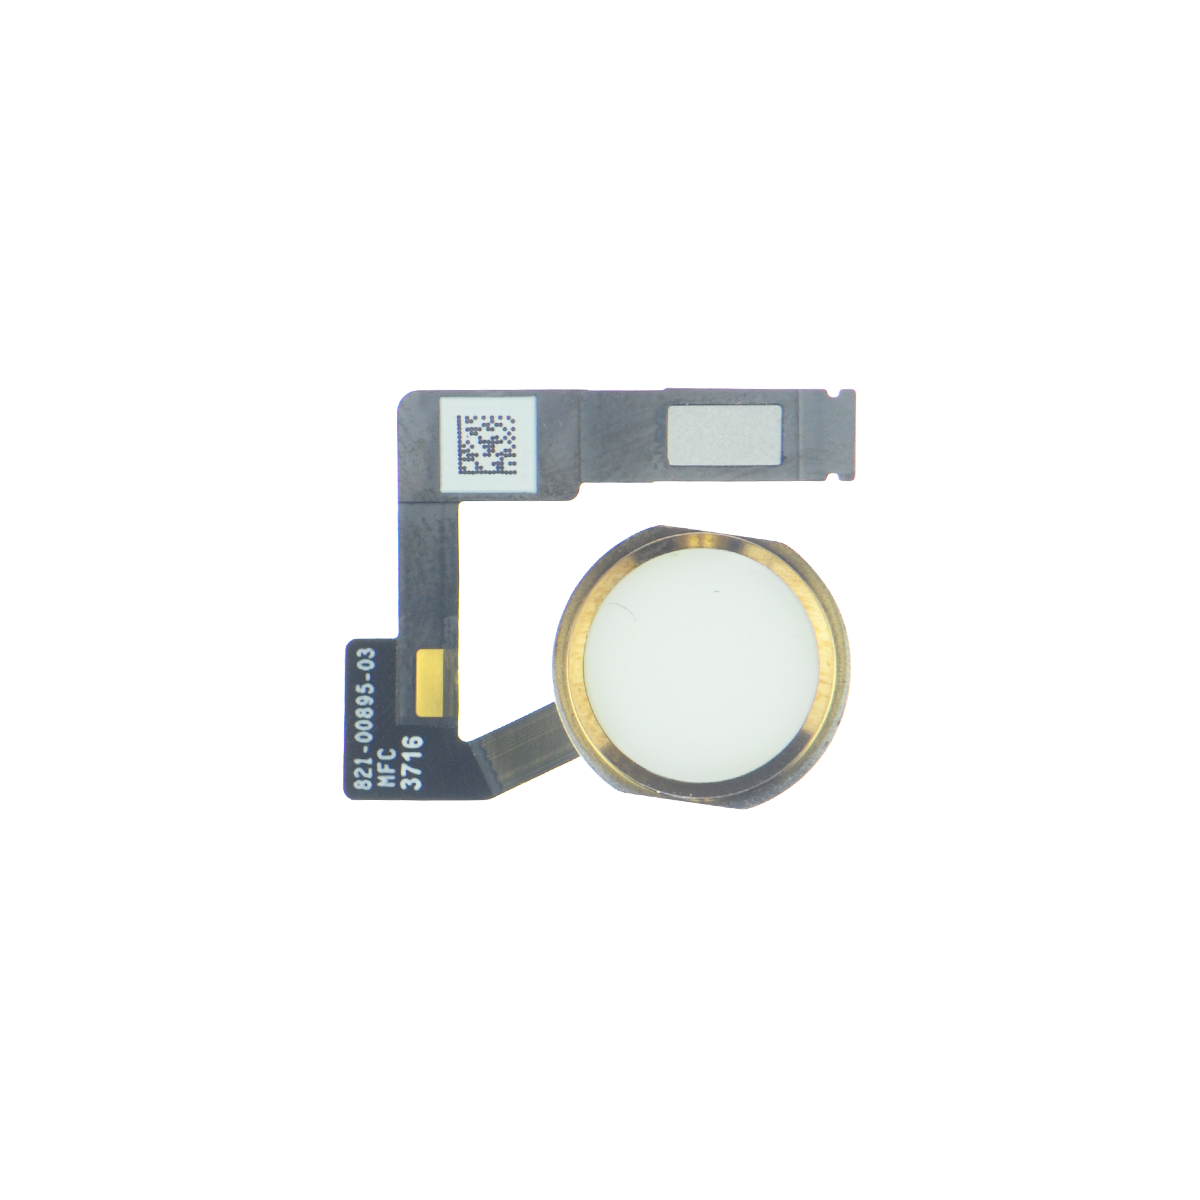 ipad-pro-10-5-home-button-touch-id-assembly-white-gold_S4VIH5044B7V.png